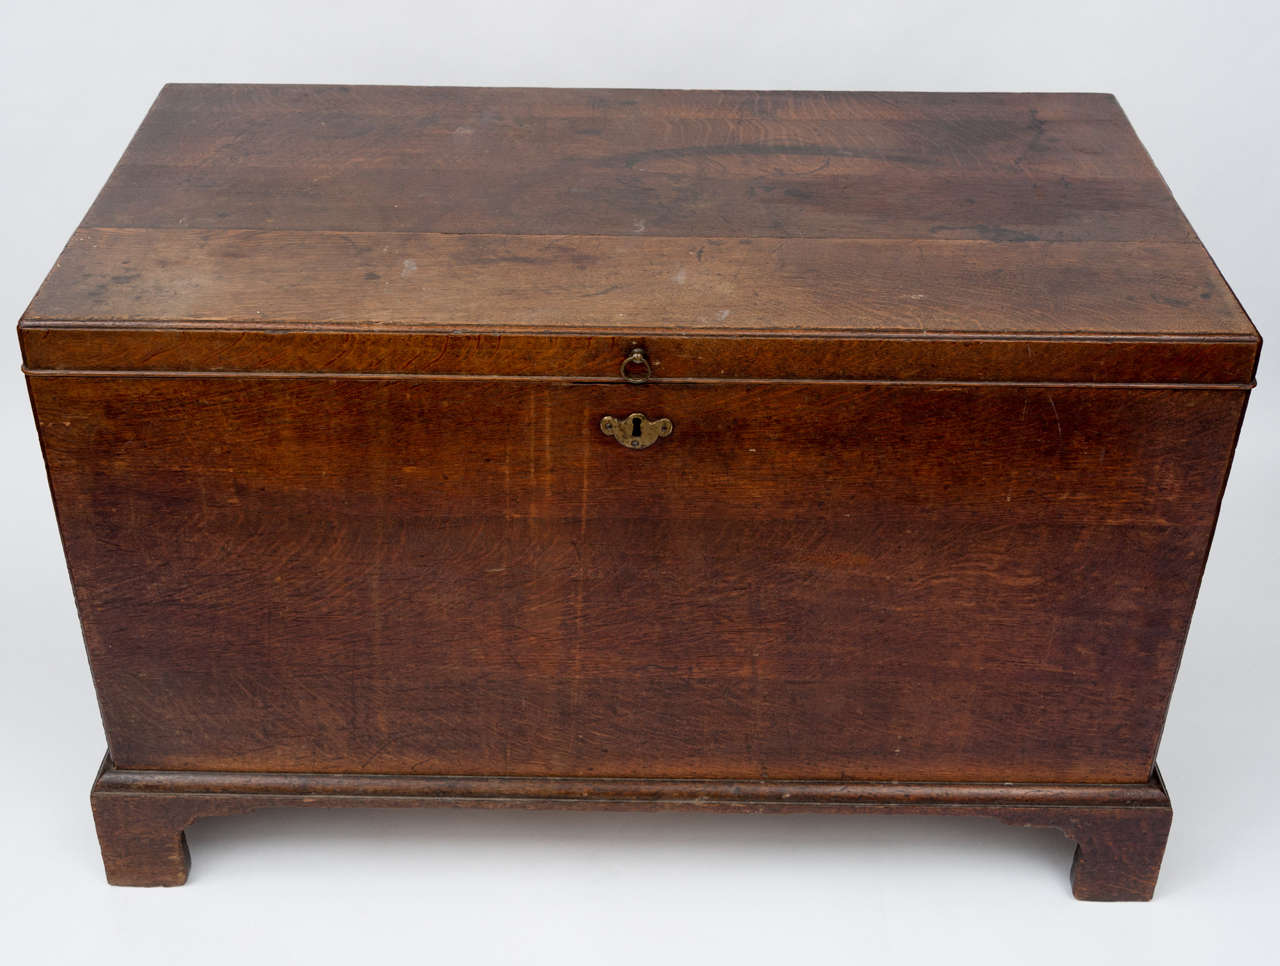 Geo II country house oak silver chest of restrained form, with large brass carrying handles. The top and corners with a moulded edge. Raised on original bracket feet. The interior still retaining its original oak and baize lined lift out trays.